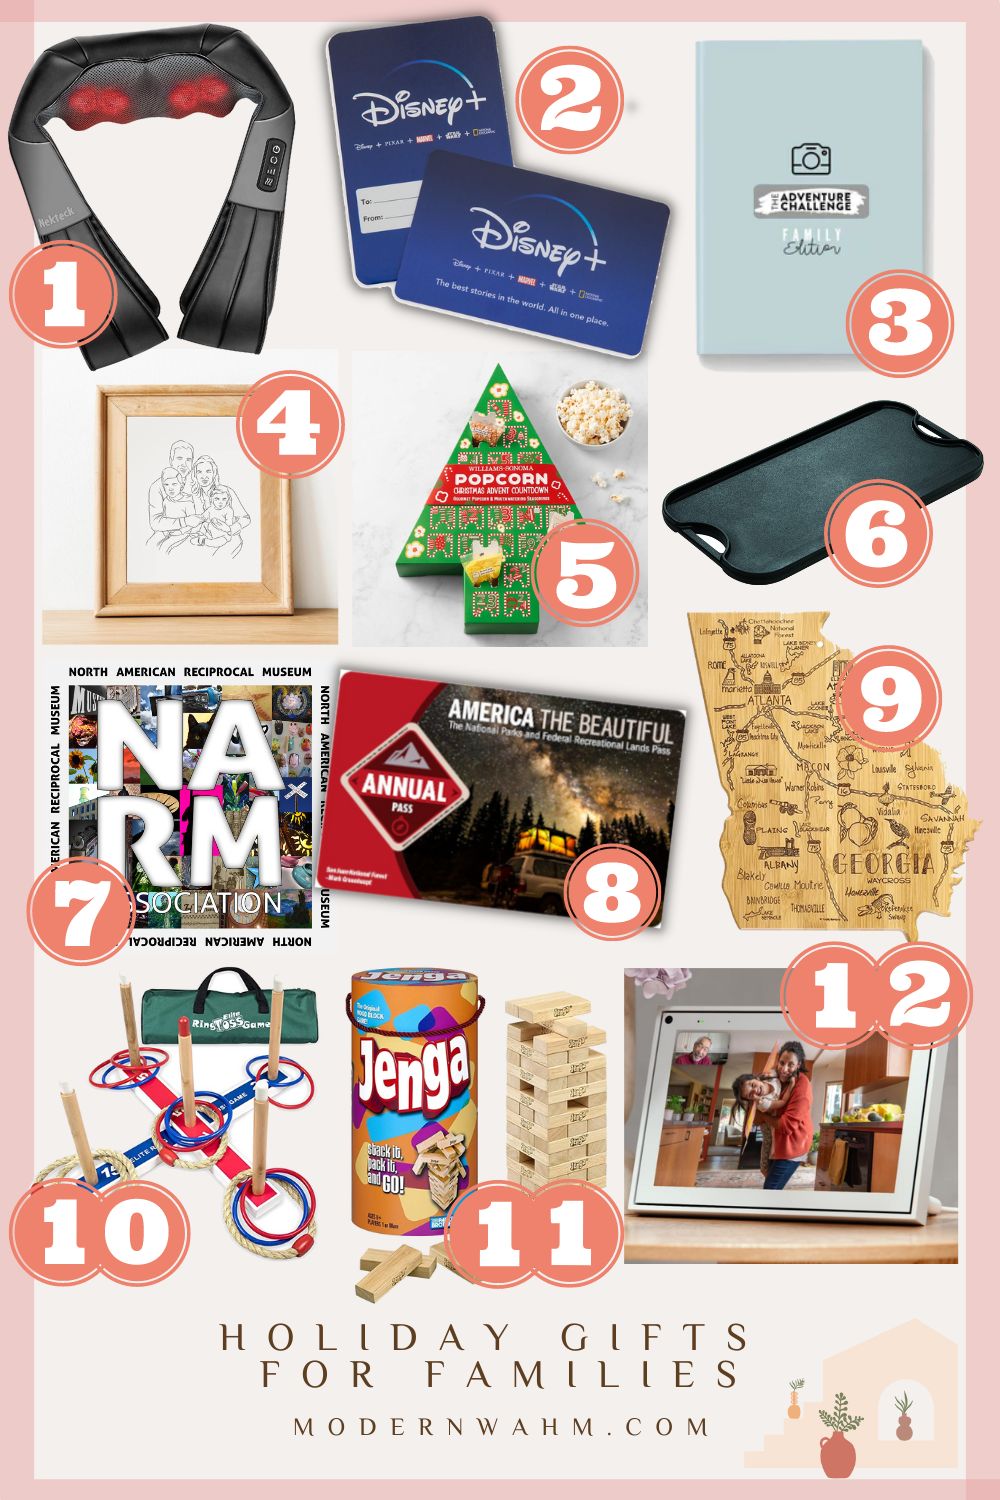 Modern WAHM Gift Guides 2